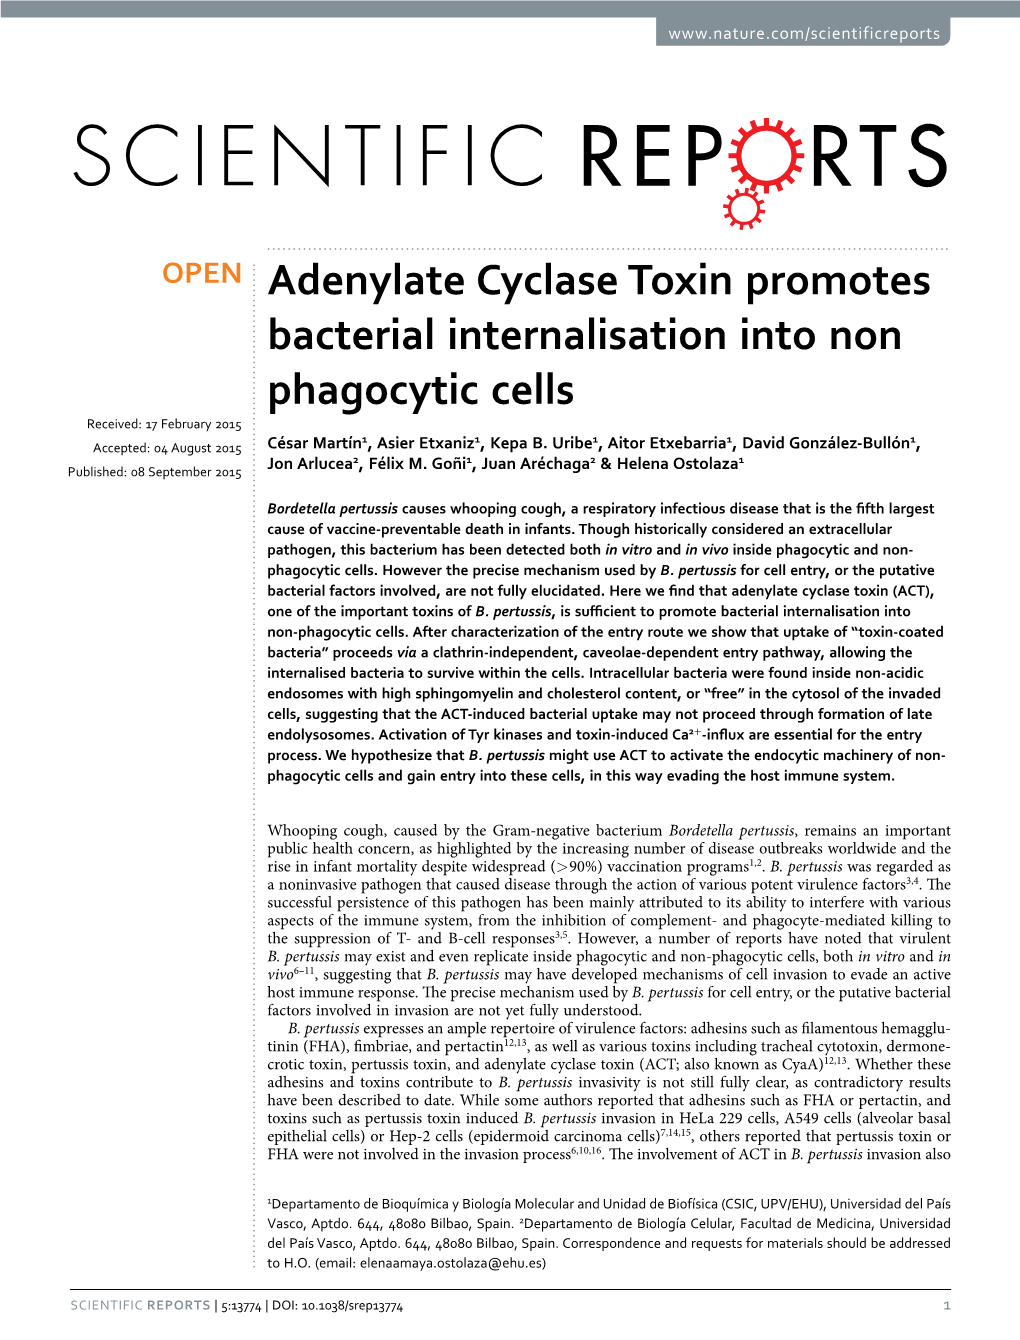 Adenylate Cyclase Toxin Promotes Bacterial Internalisation Into Non Phagocytic Cells